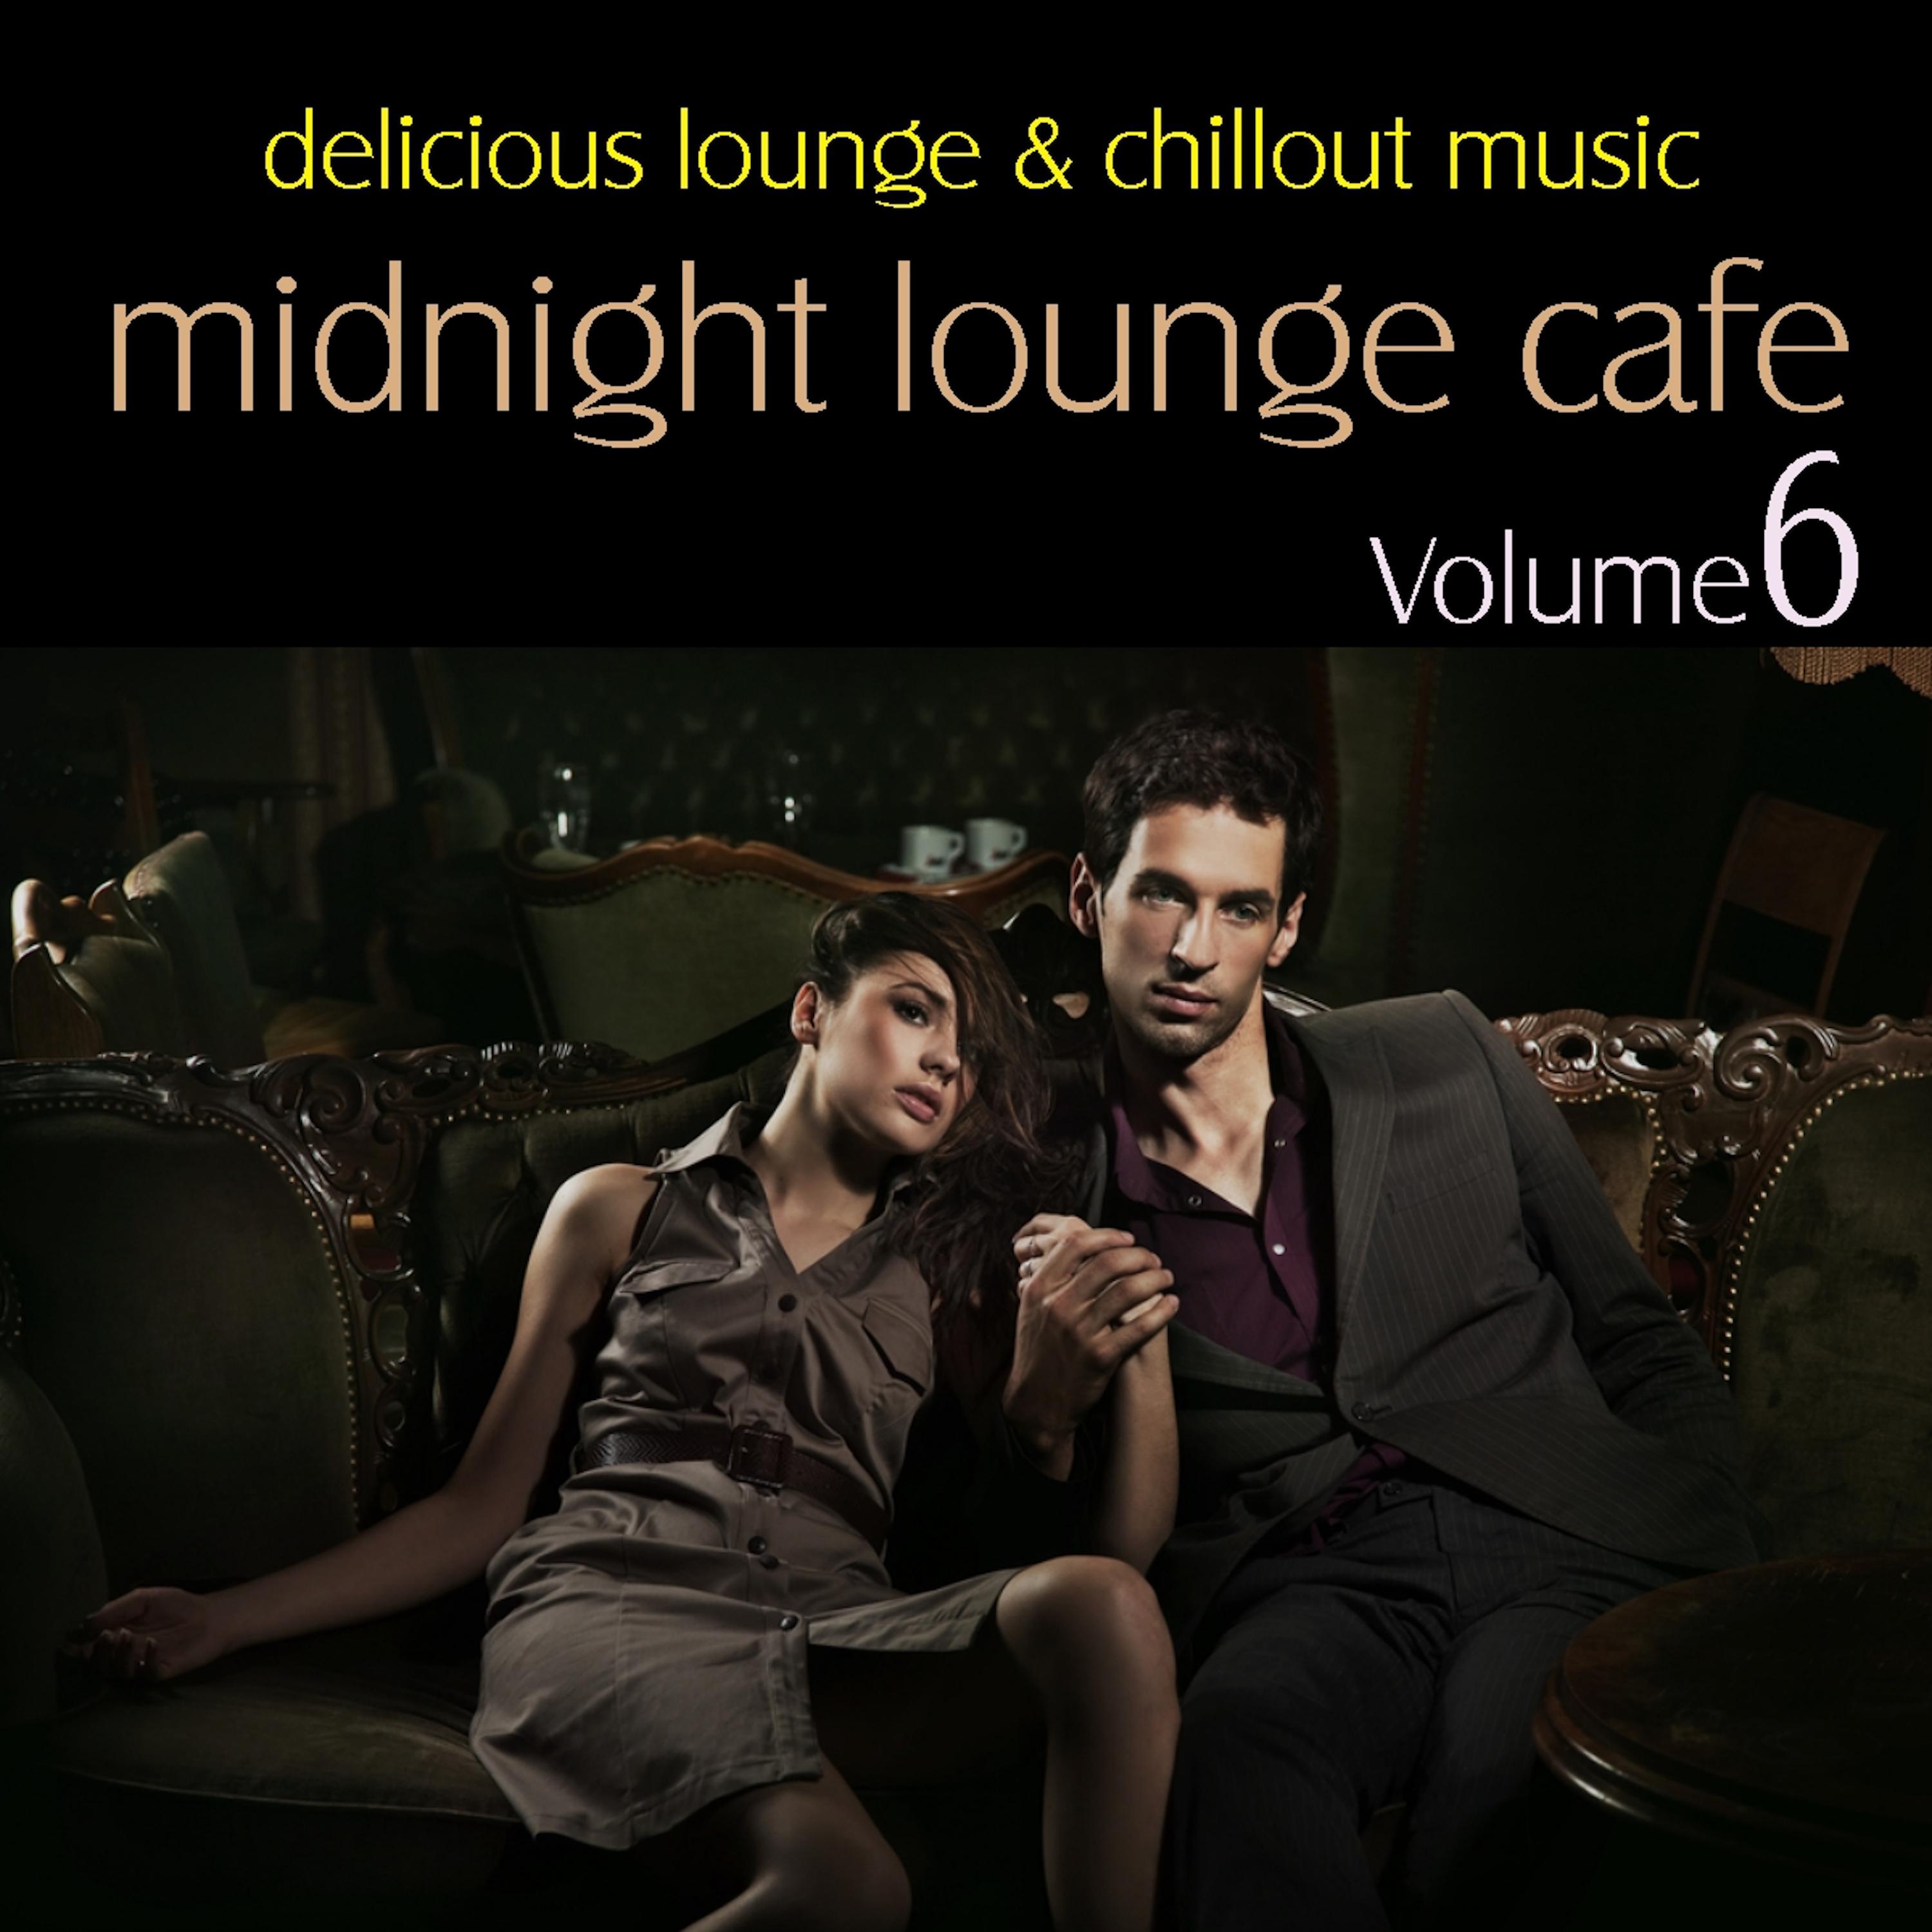 Midnight Lounge Cafe Vol. 6 - Delicious Lounge & Chillout Music